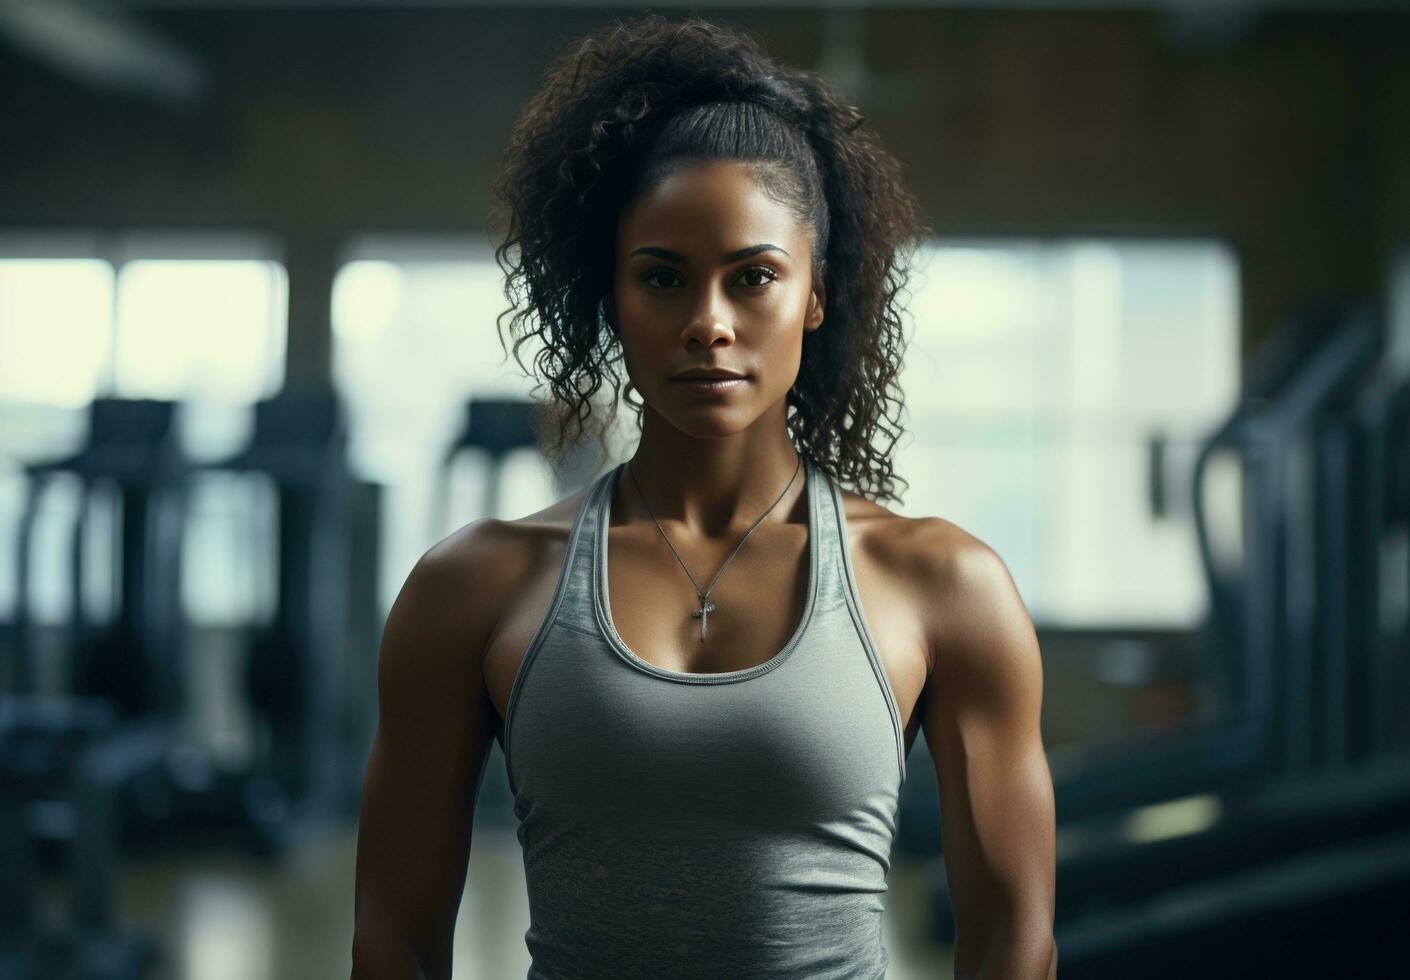 AI generated a black woman standing in a gym wearing a tank top, photo